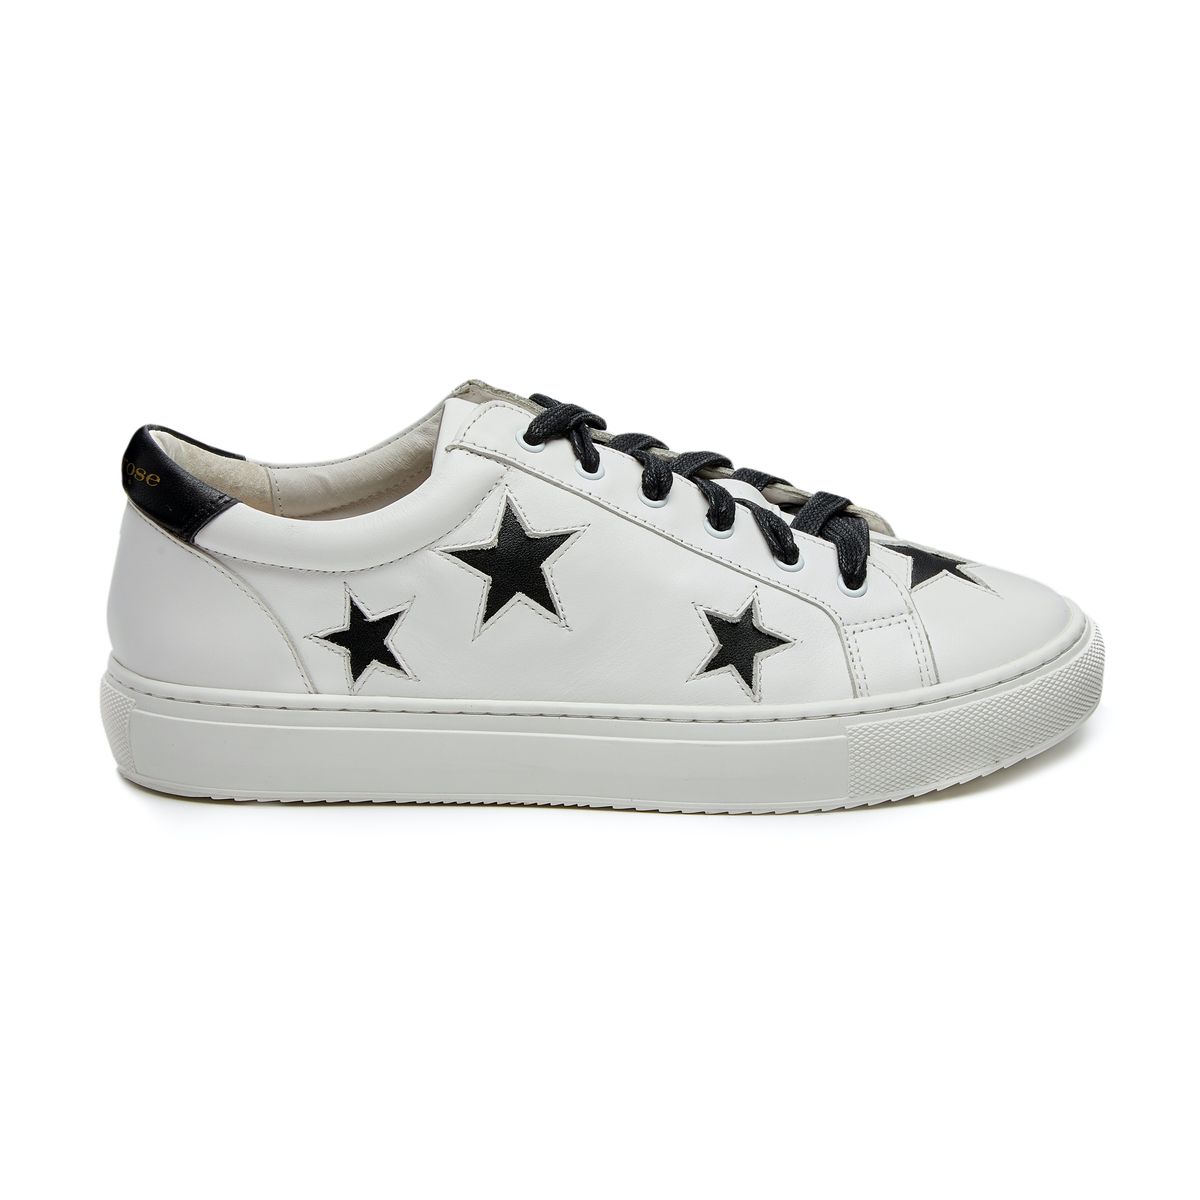 Cocorose London Hoxton White with Black Star Trainers